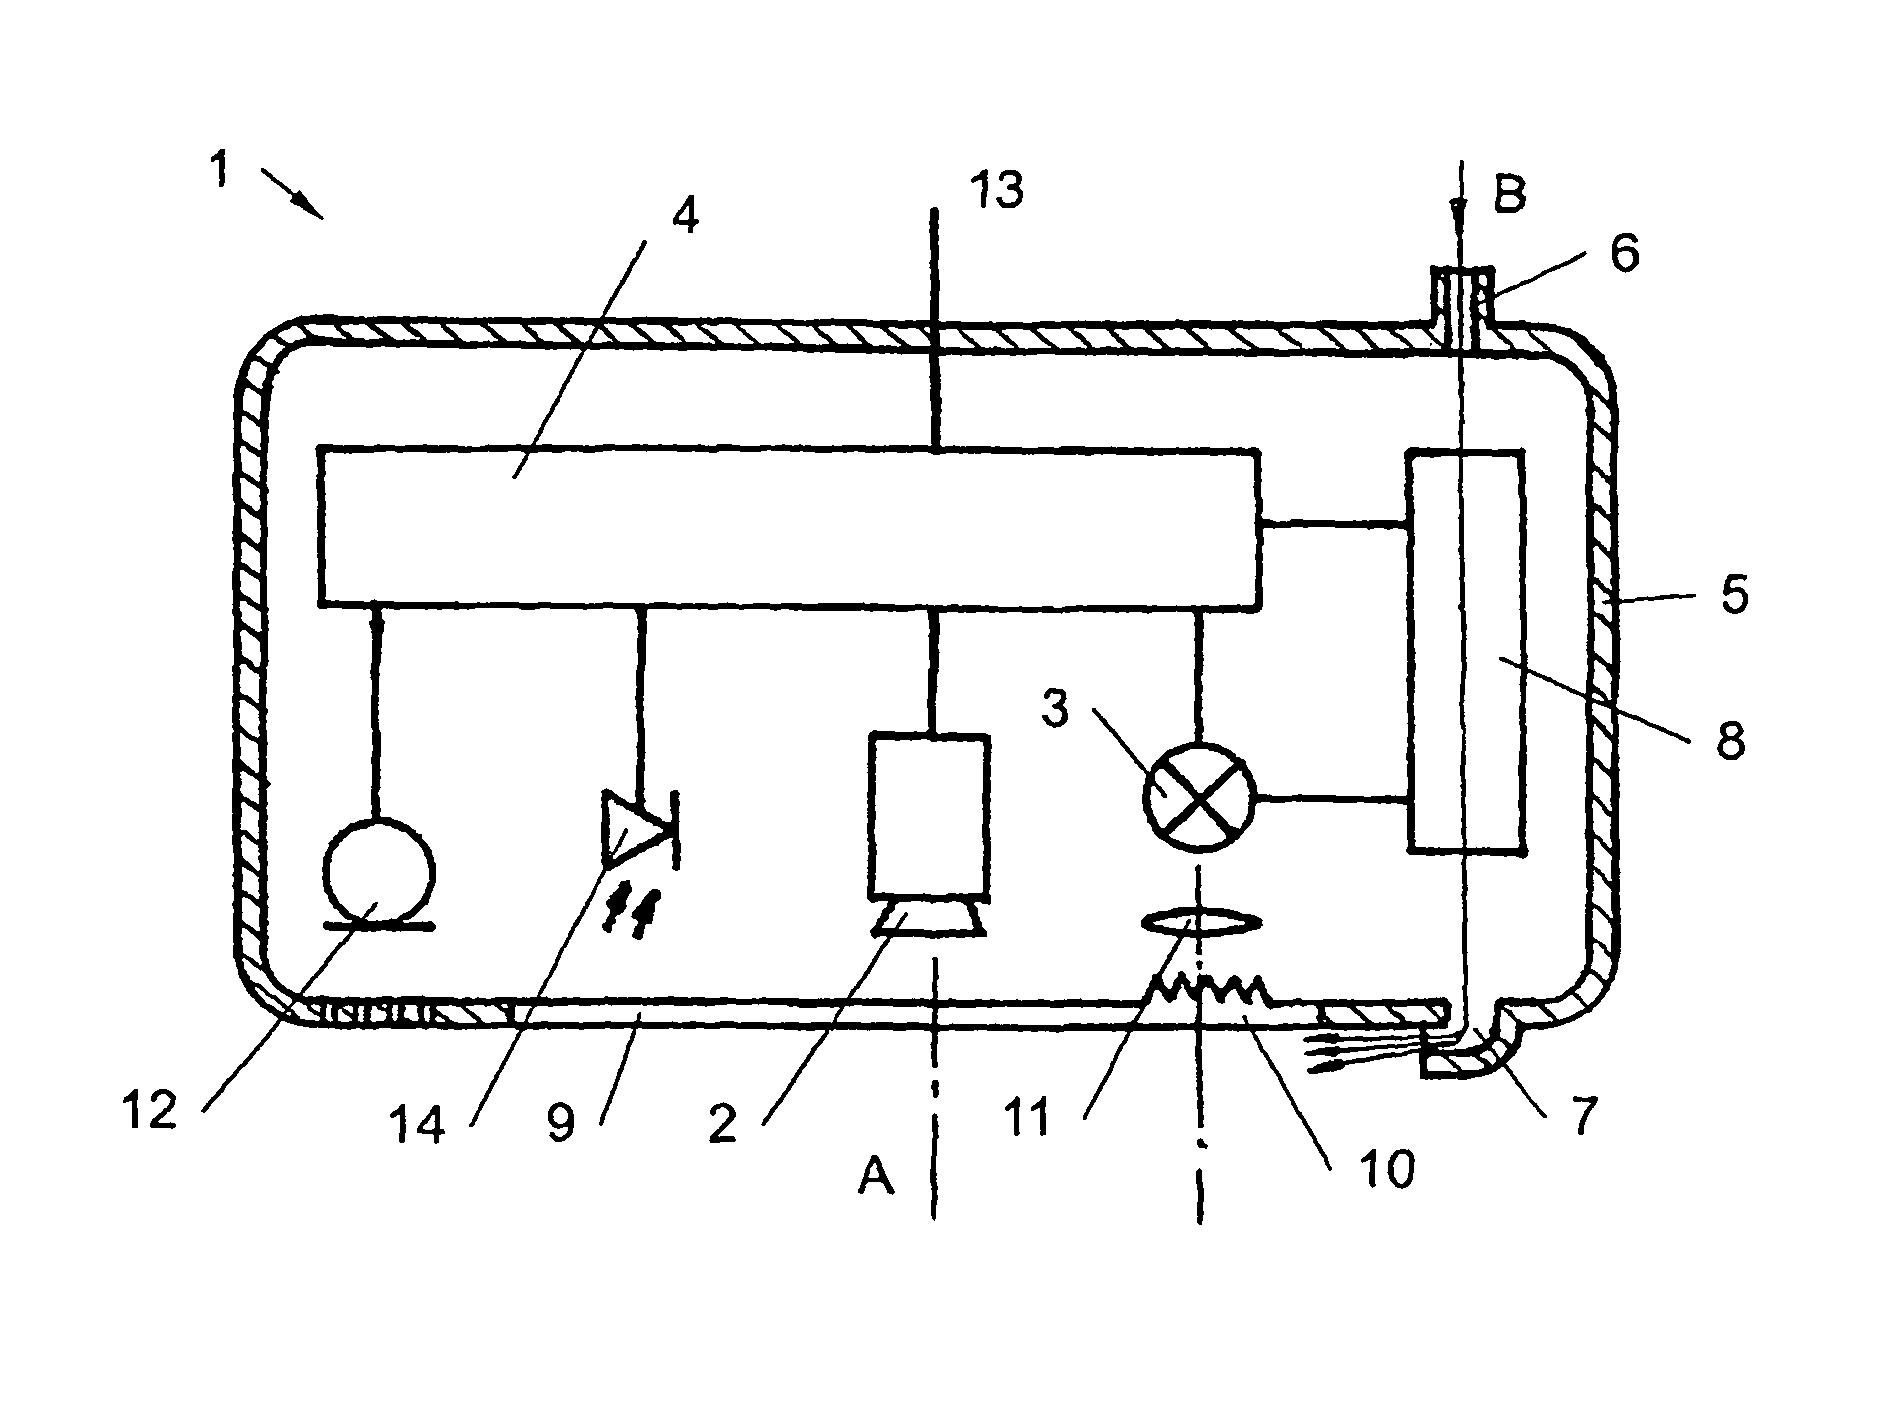 Monitoring module for monitoring a process with an electric arc